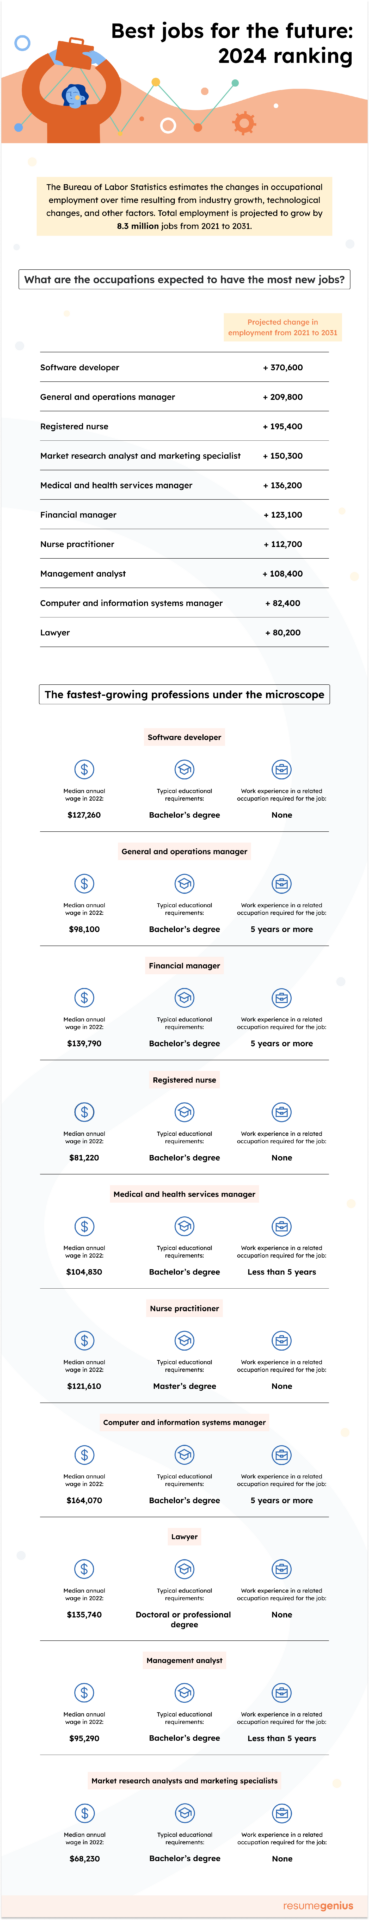 Infographic showing the fastest-growing jobs of 2023 as well as the median annual wage, educational requirements, and work experience required.